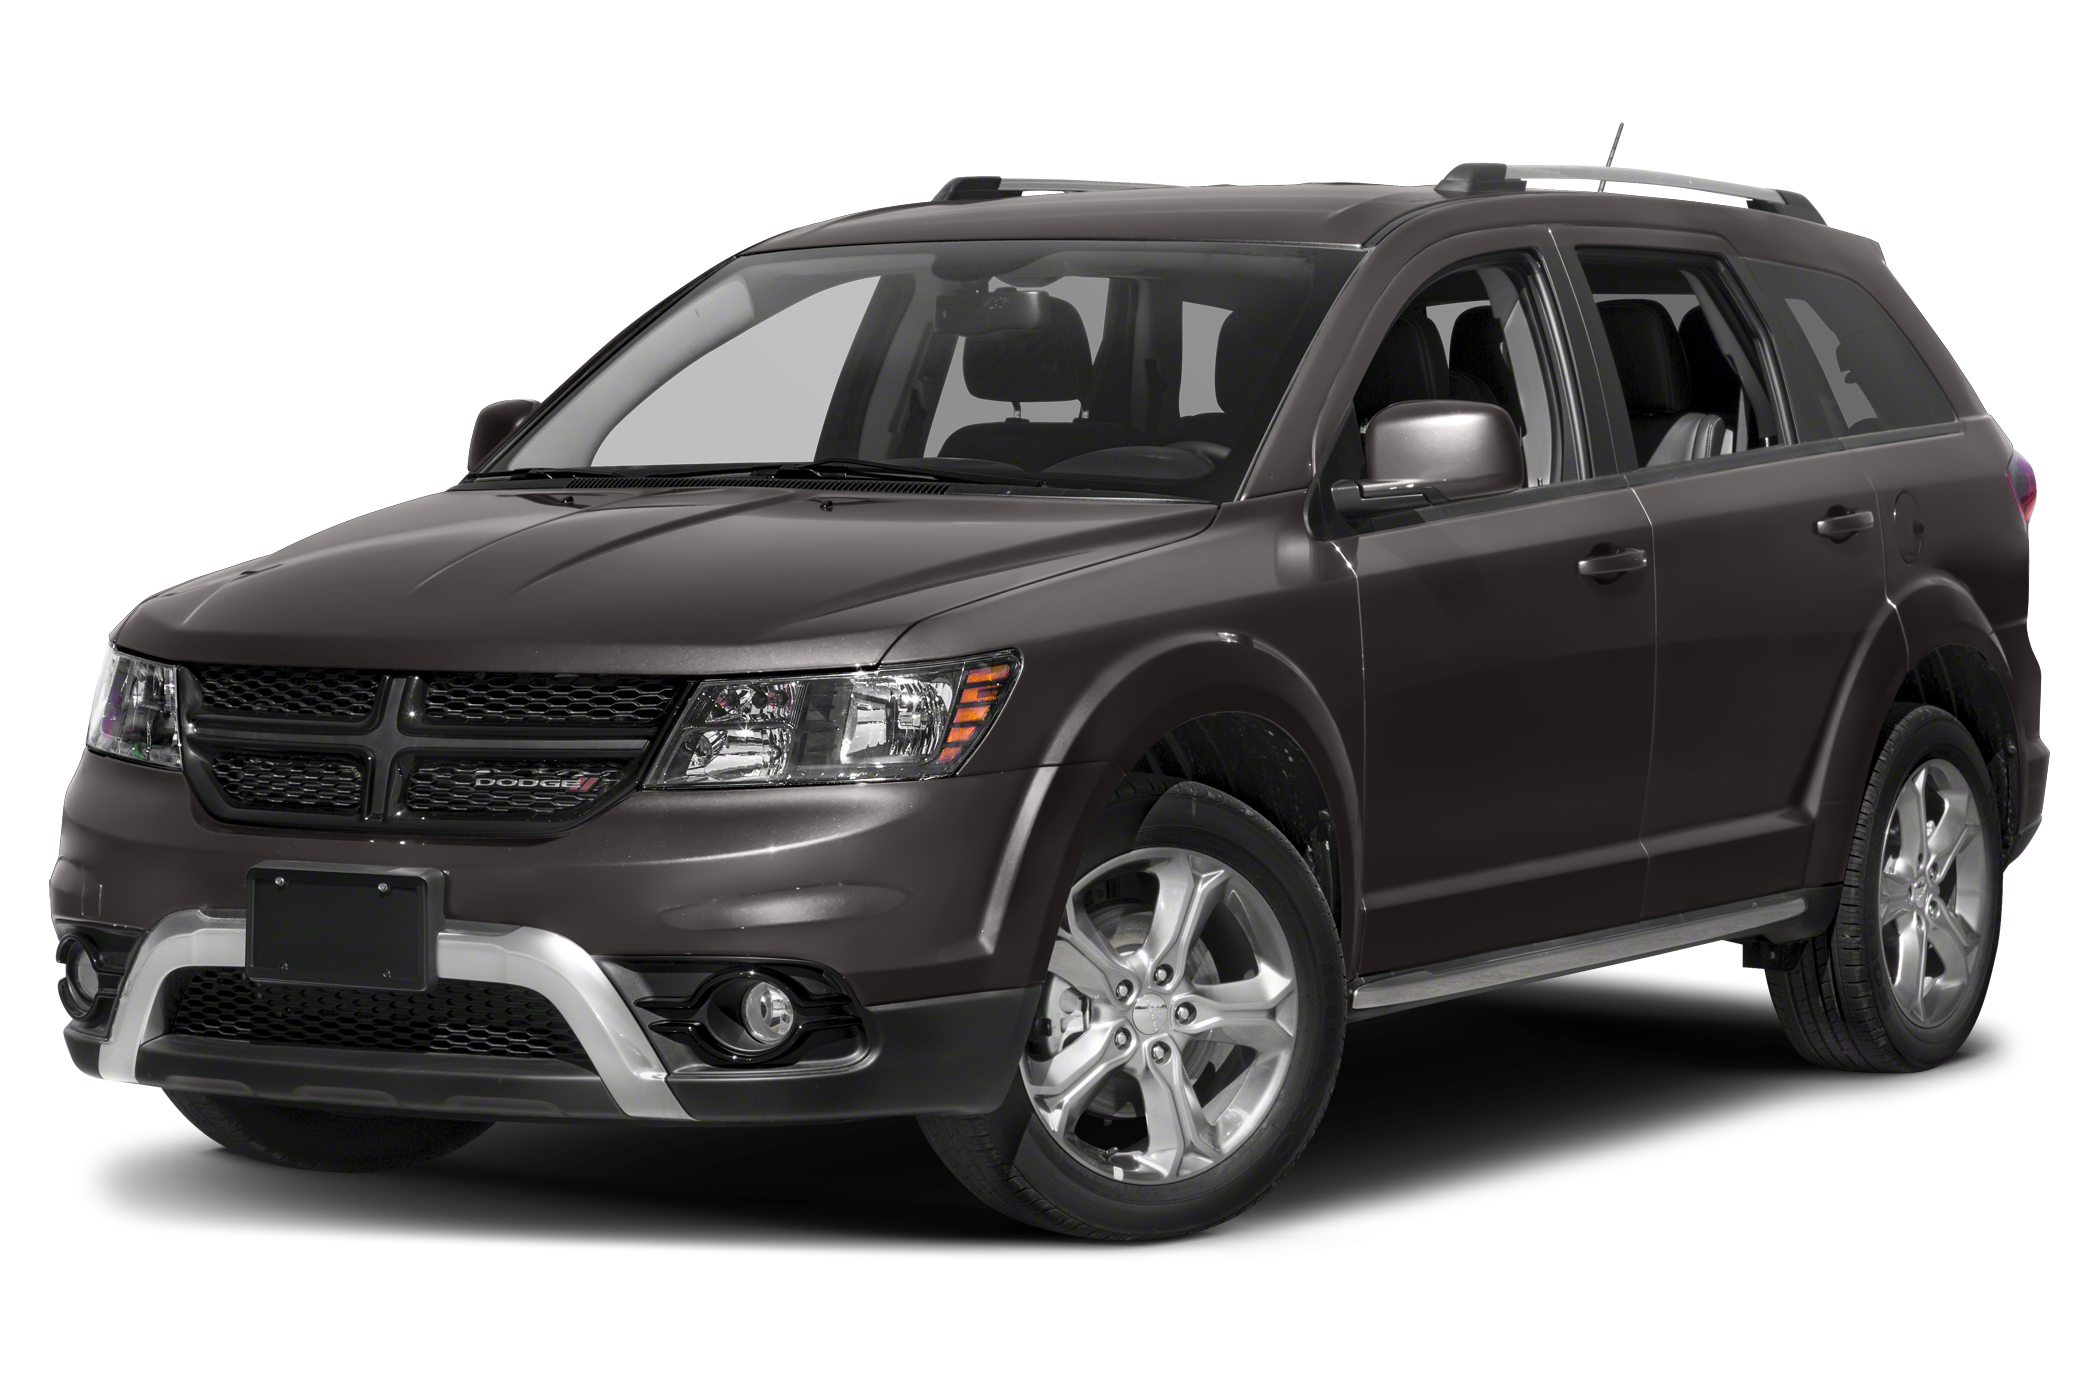 Side view of the 2016 Dodge Journey